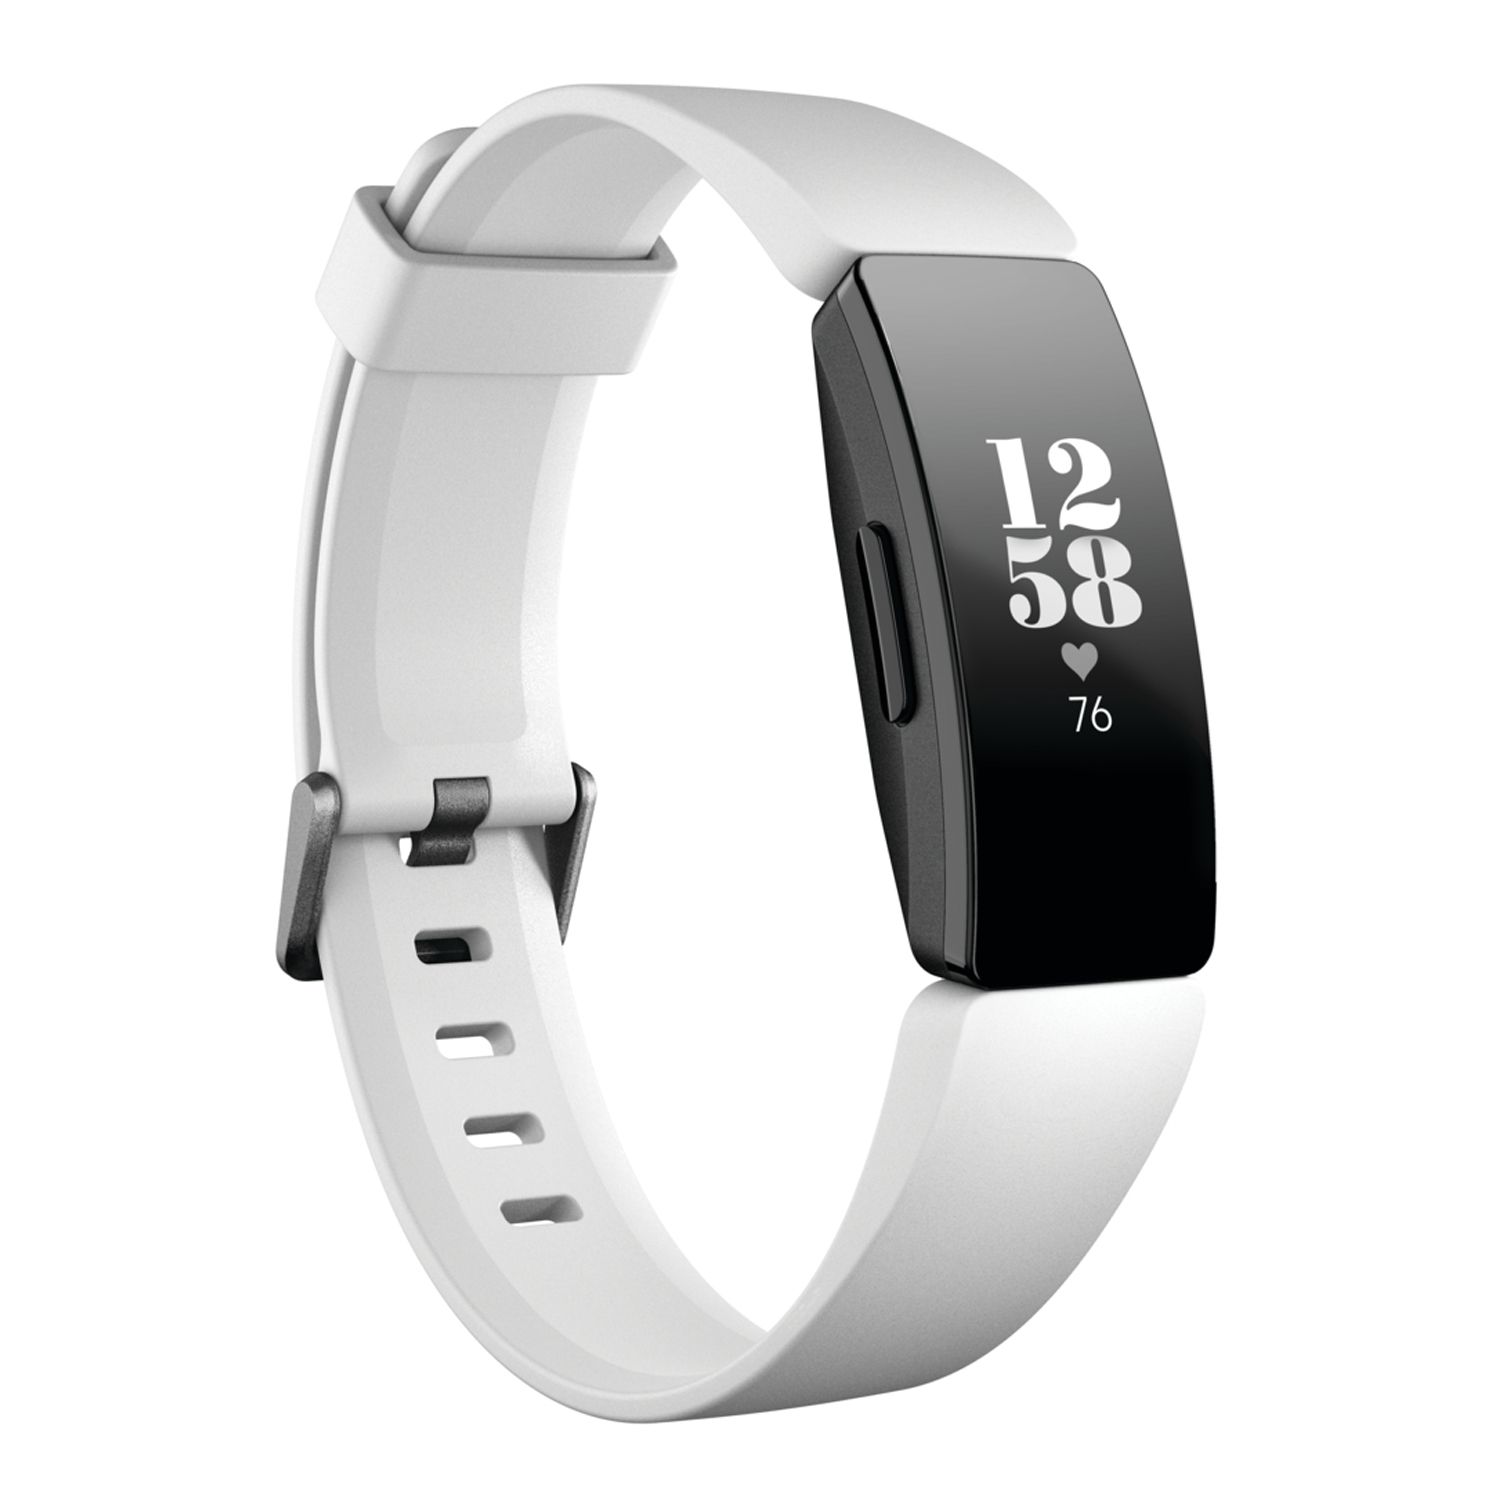 fitbit inspire hr connecting to tracker